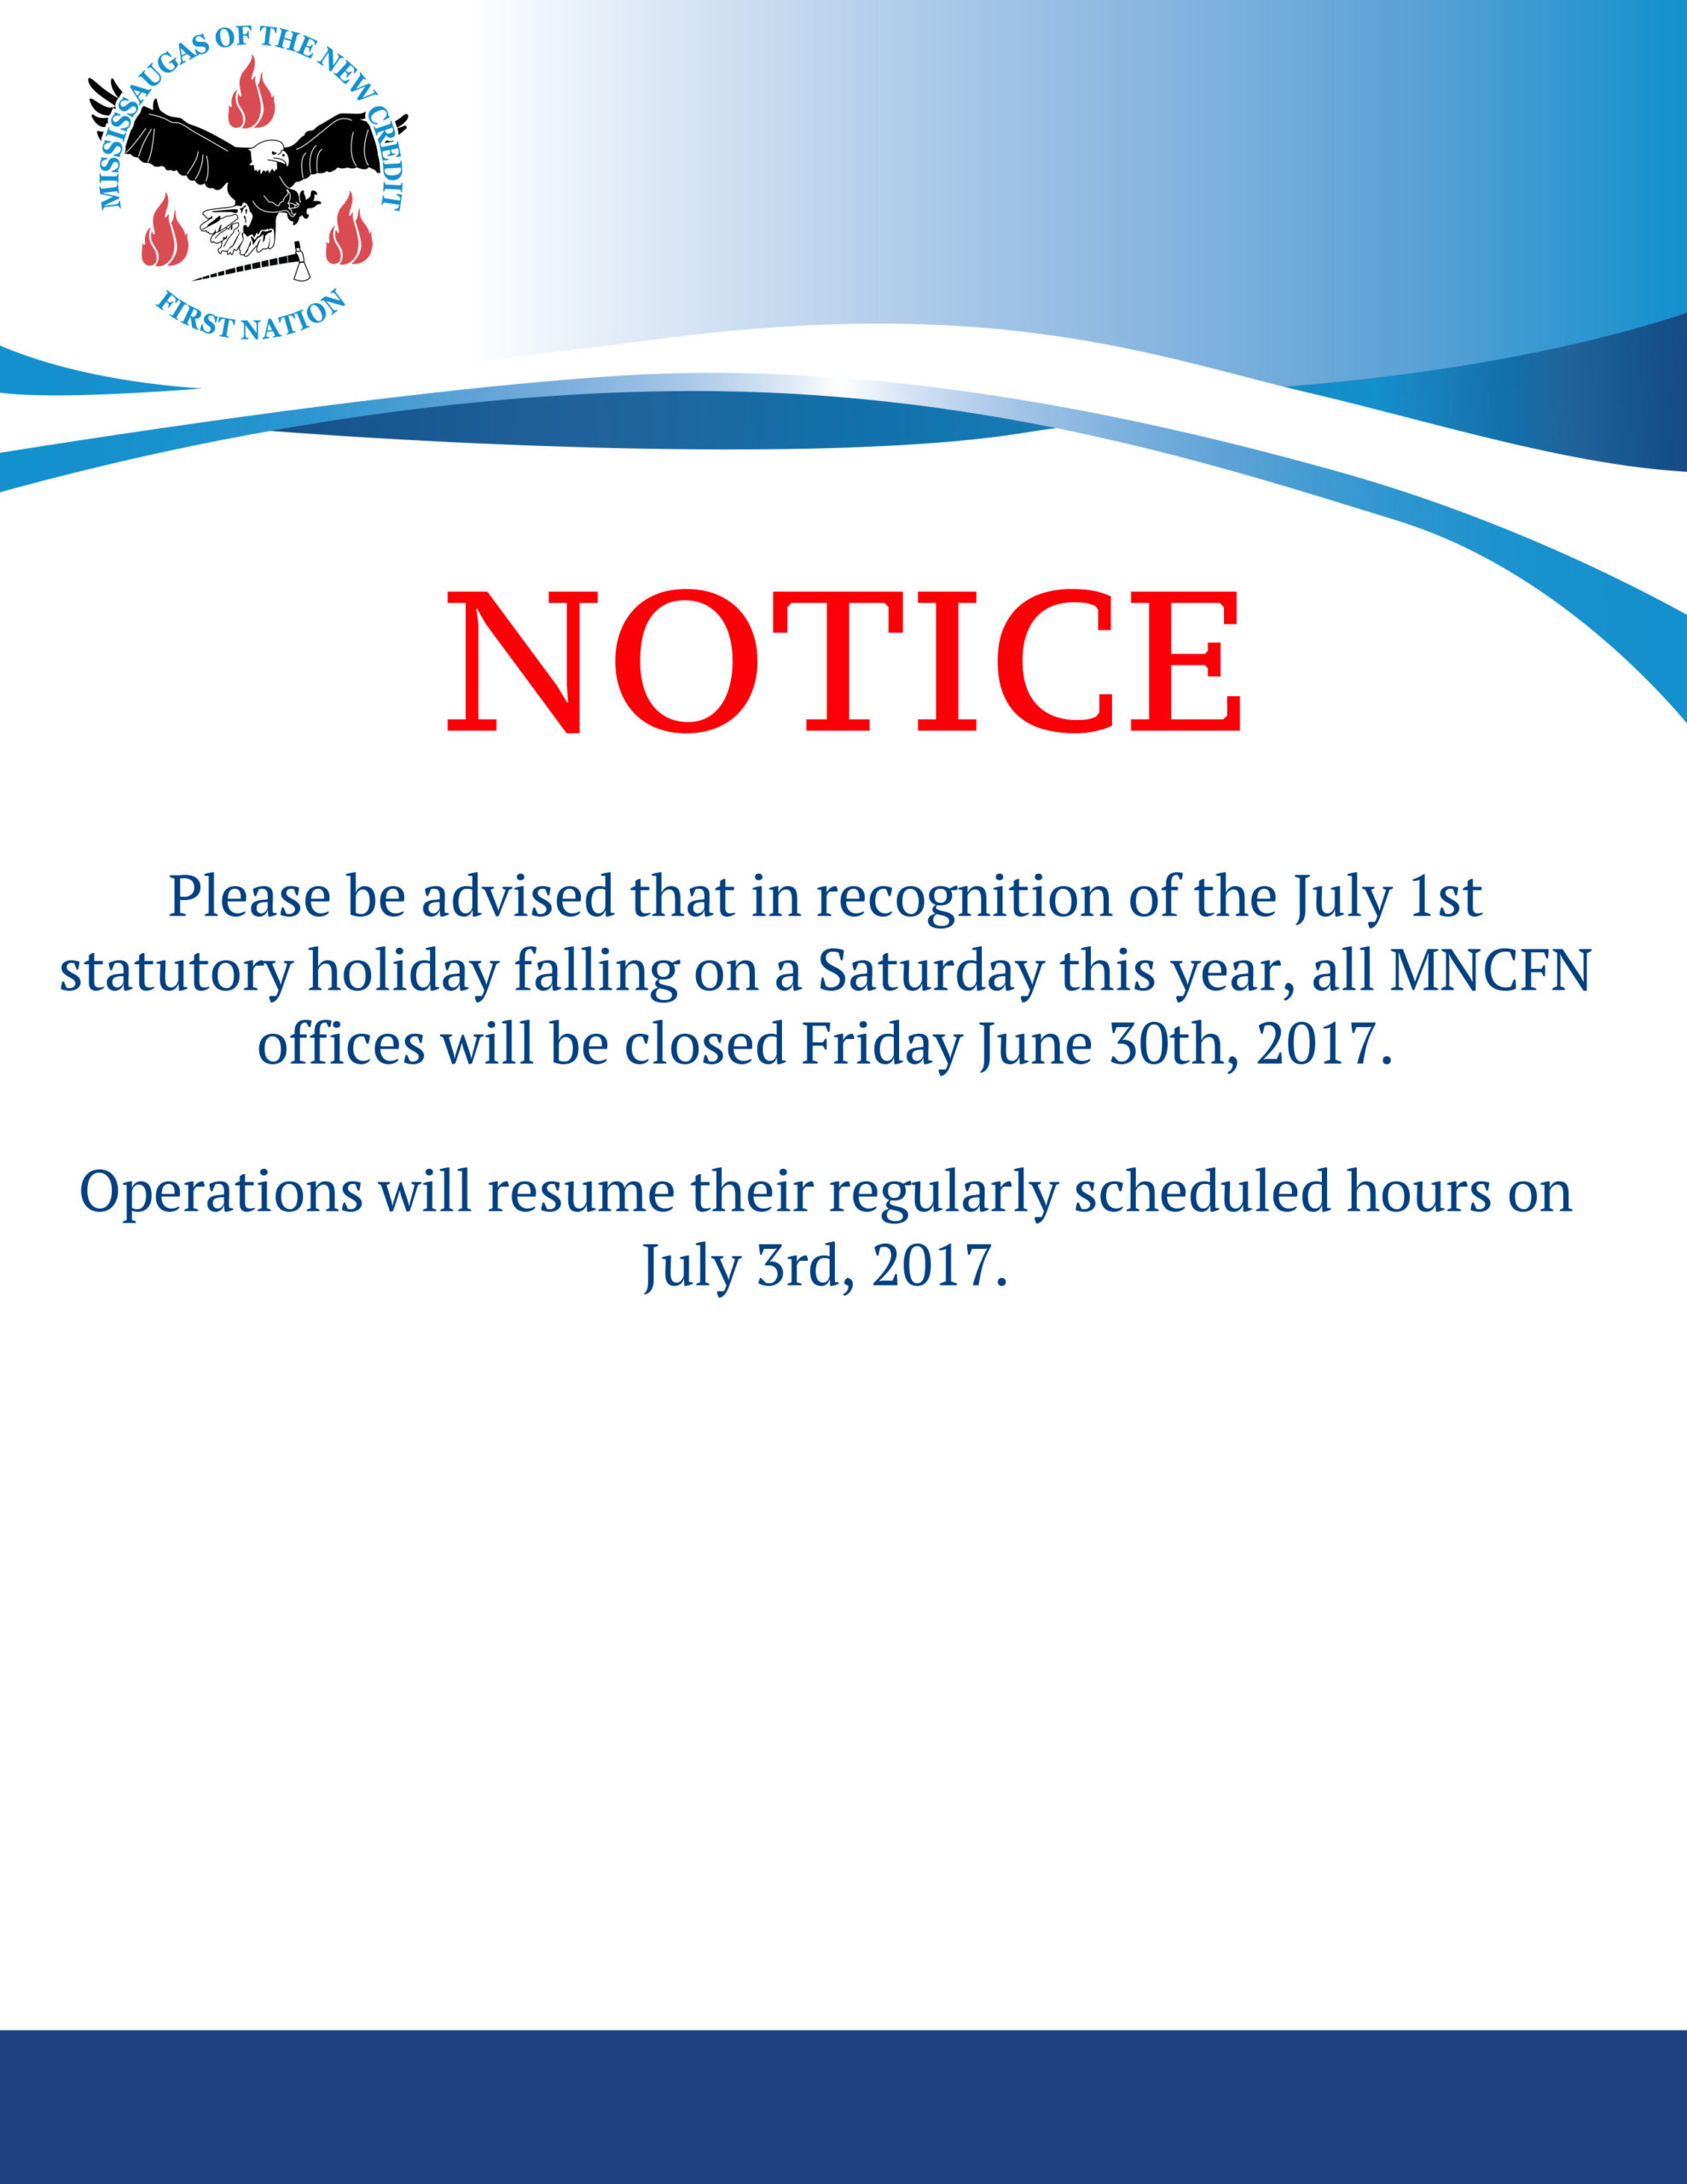 MNCFN Offices Will Be Closed Friday June 30, 2017